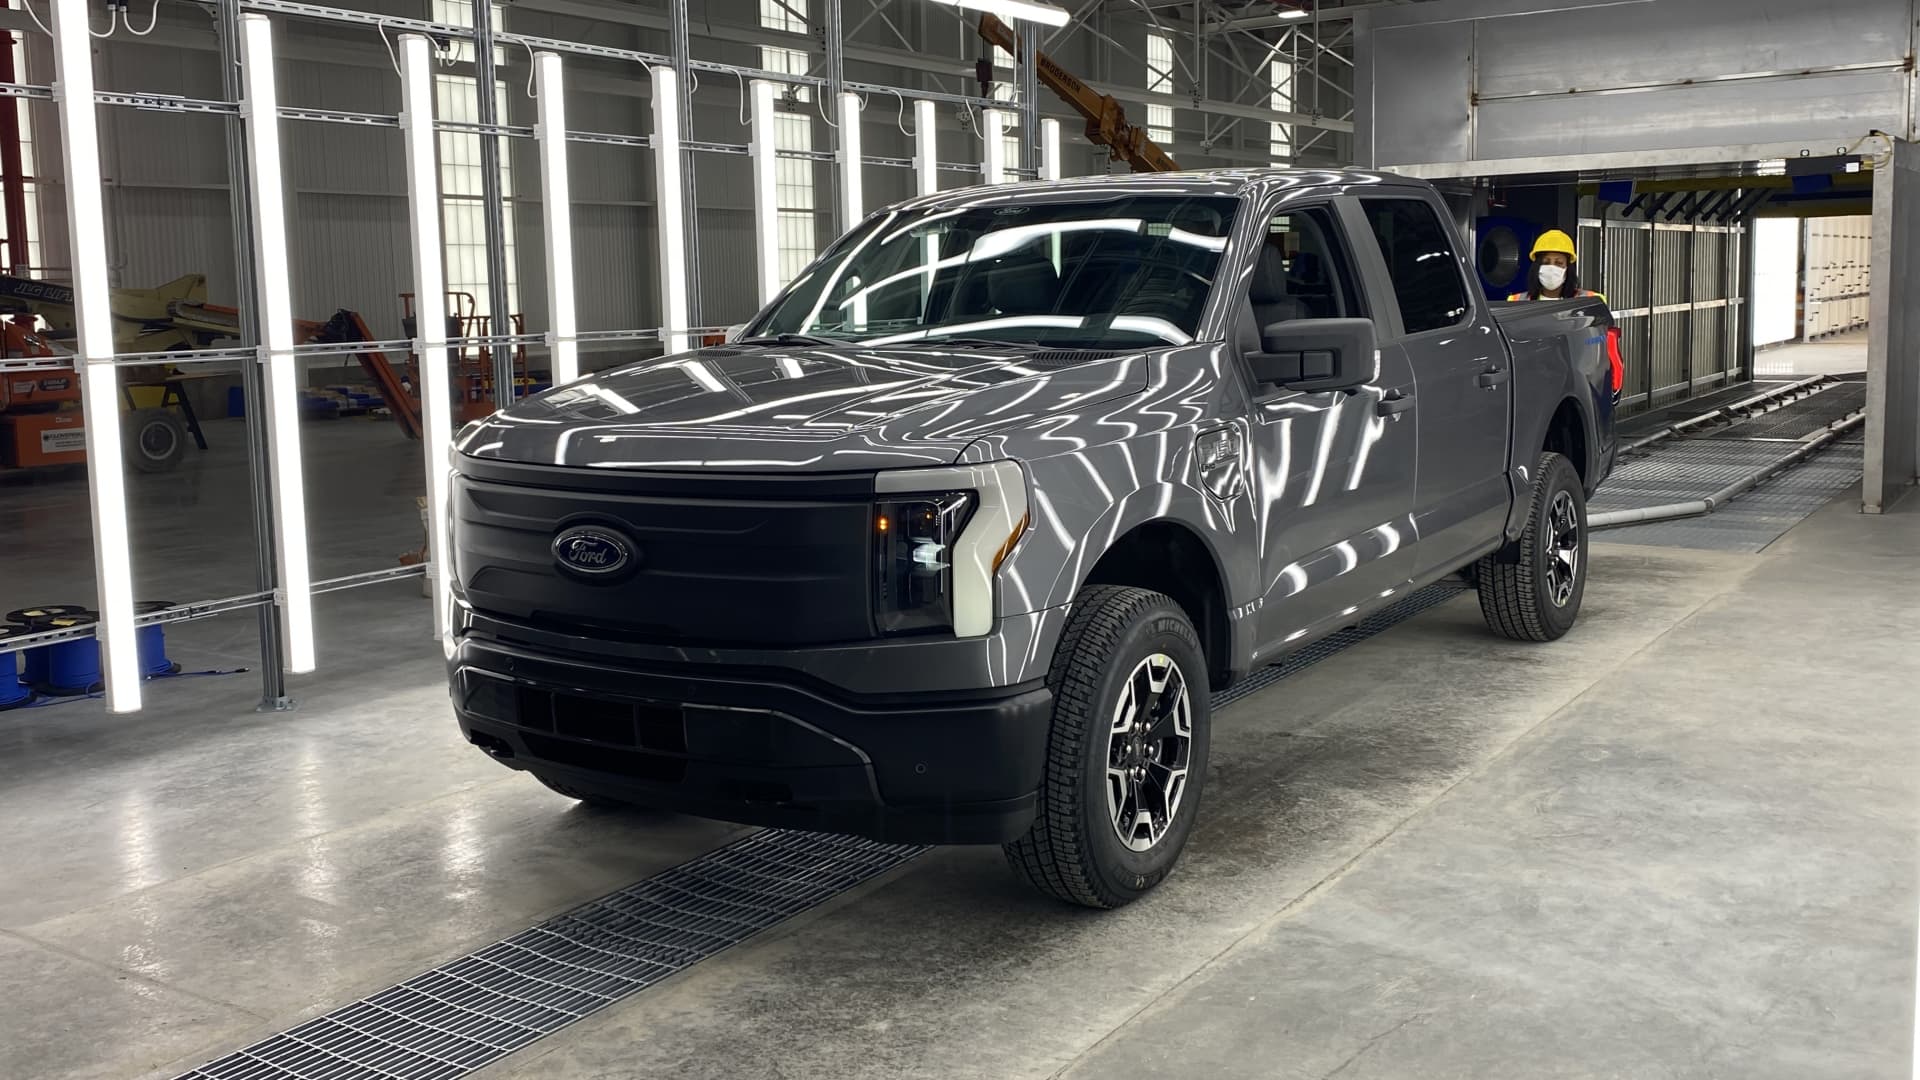 Ford has started initial pre-production of its electric F-150 Lightning pickup truck at a new plant in Dearborn, Mich.